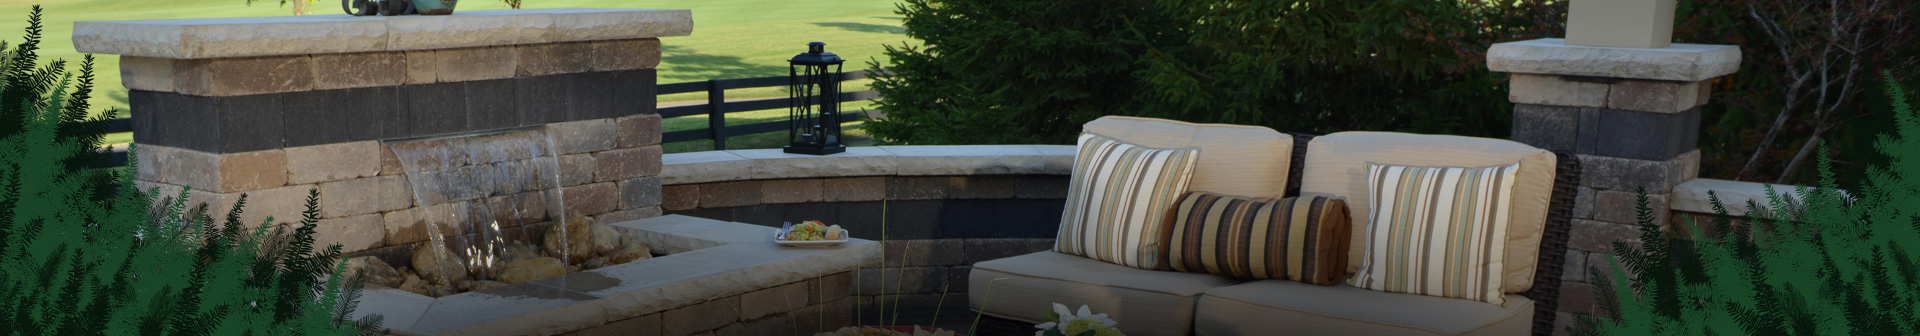 Outdoor living spaces for parties and daily living in Franklin, Wi